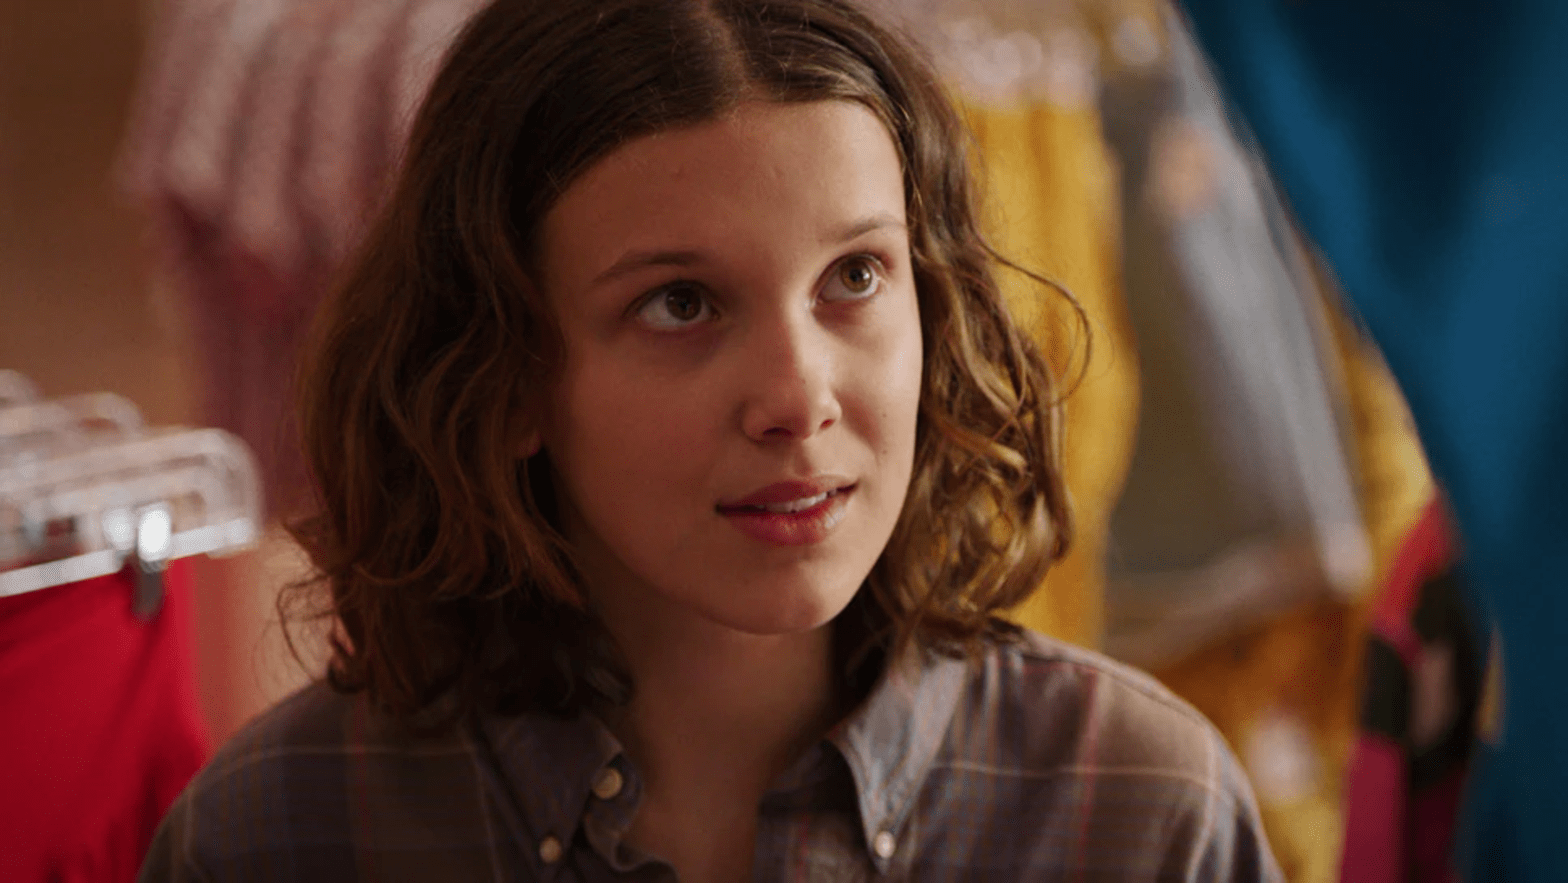 Millie Bobby Brown as Eleven in Stranger Things season three. (Image: Netflix)